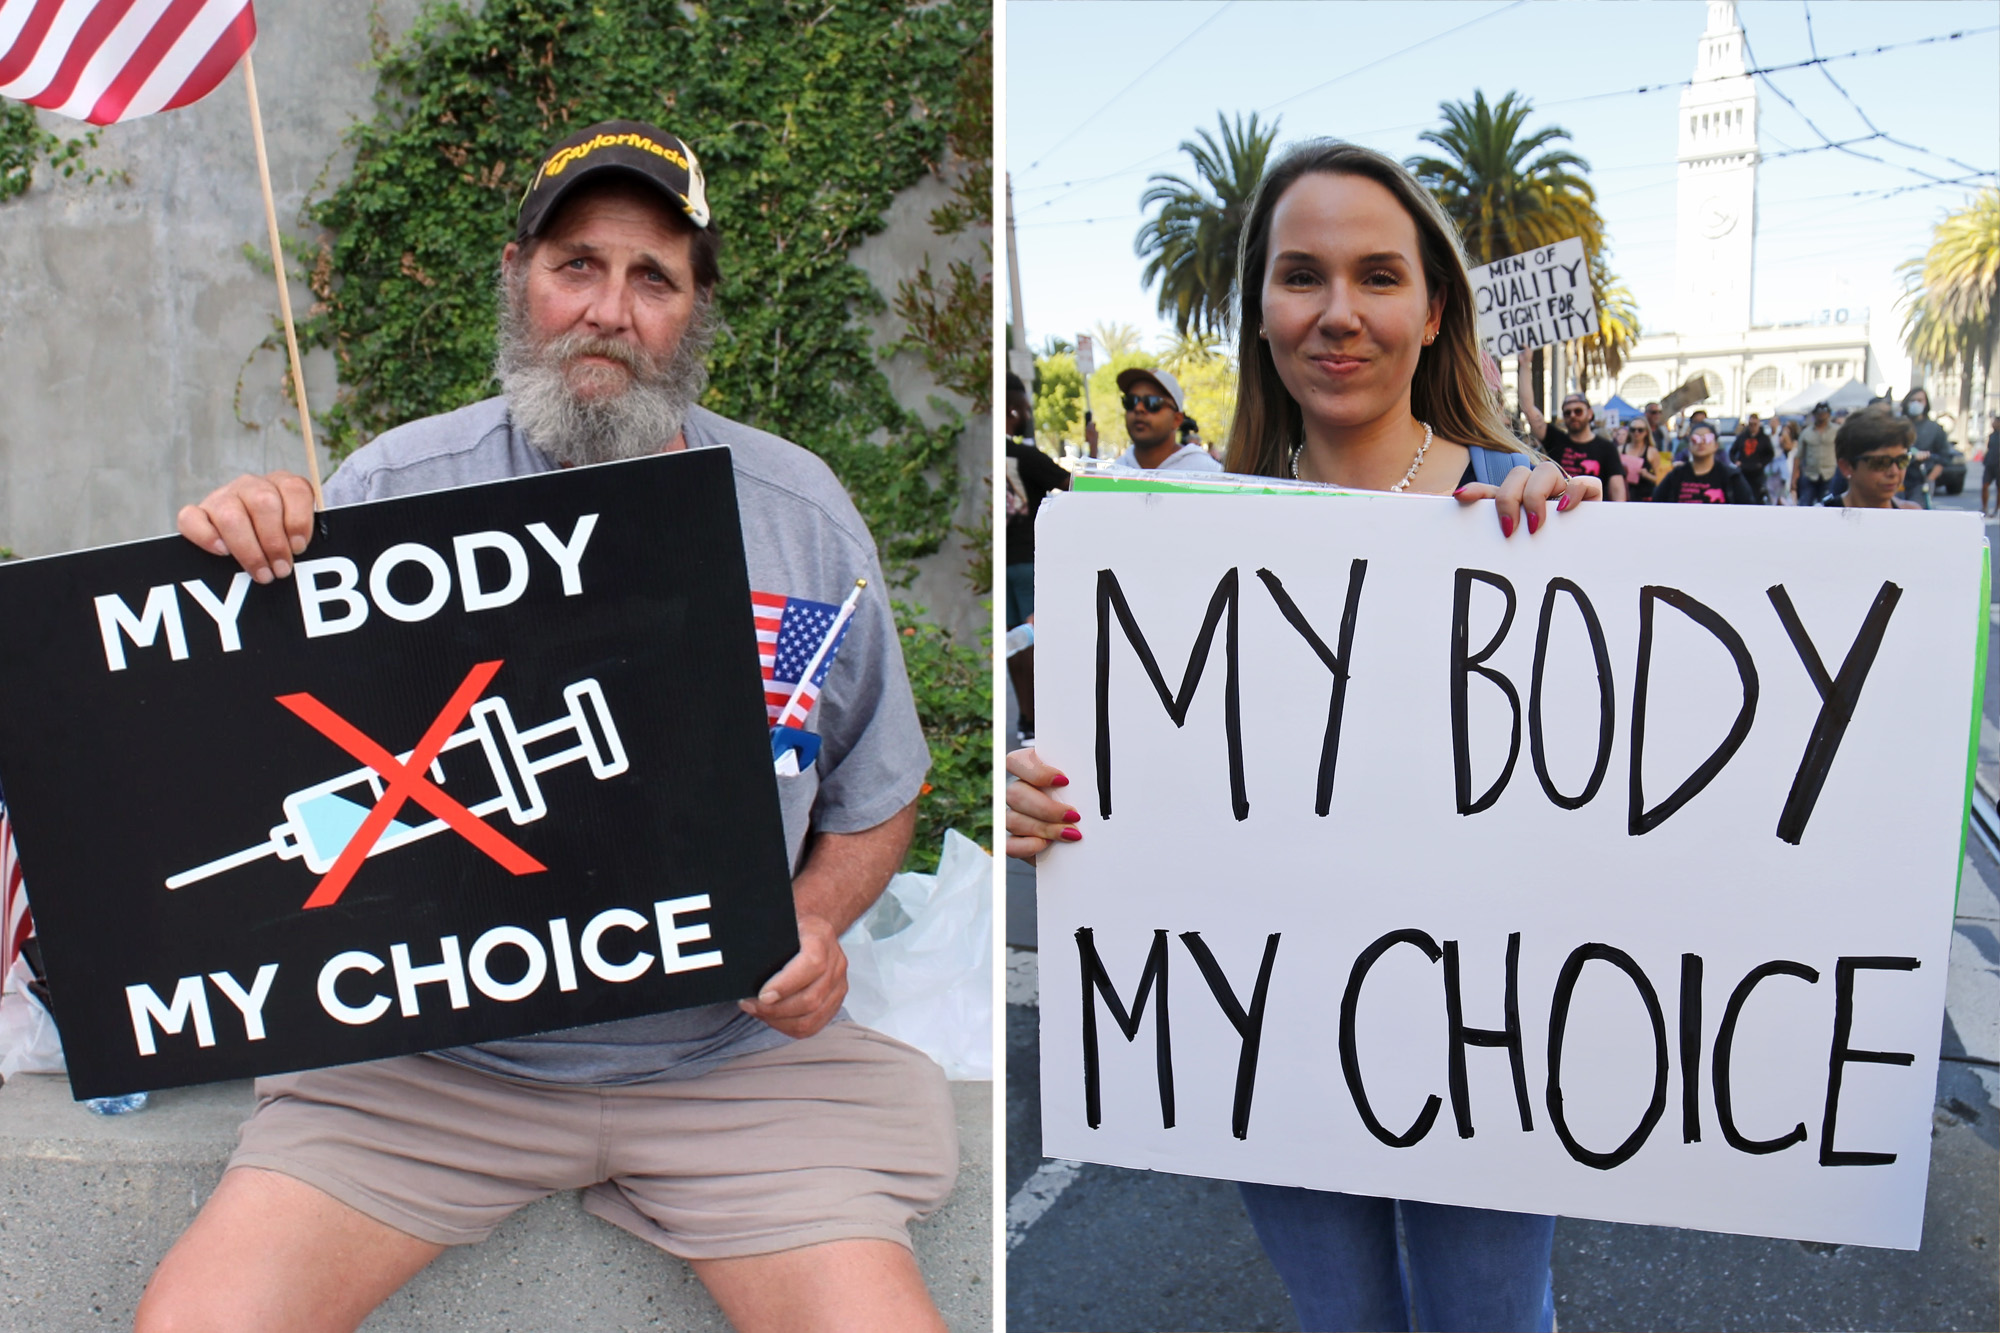 ‘My Body, My Choice’: How Vaccine Foes Co-opted the Abortion Rallying Cry